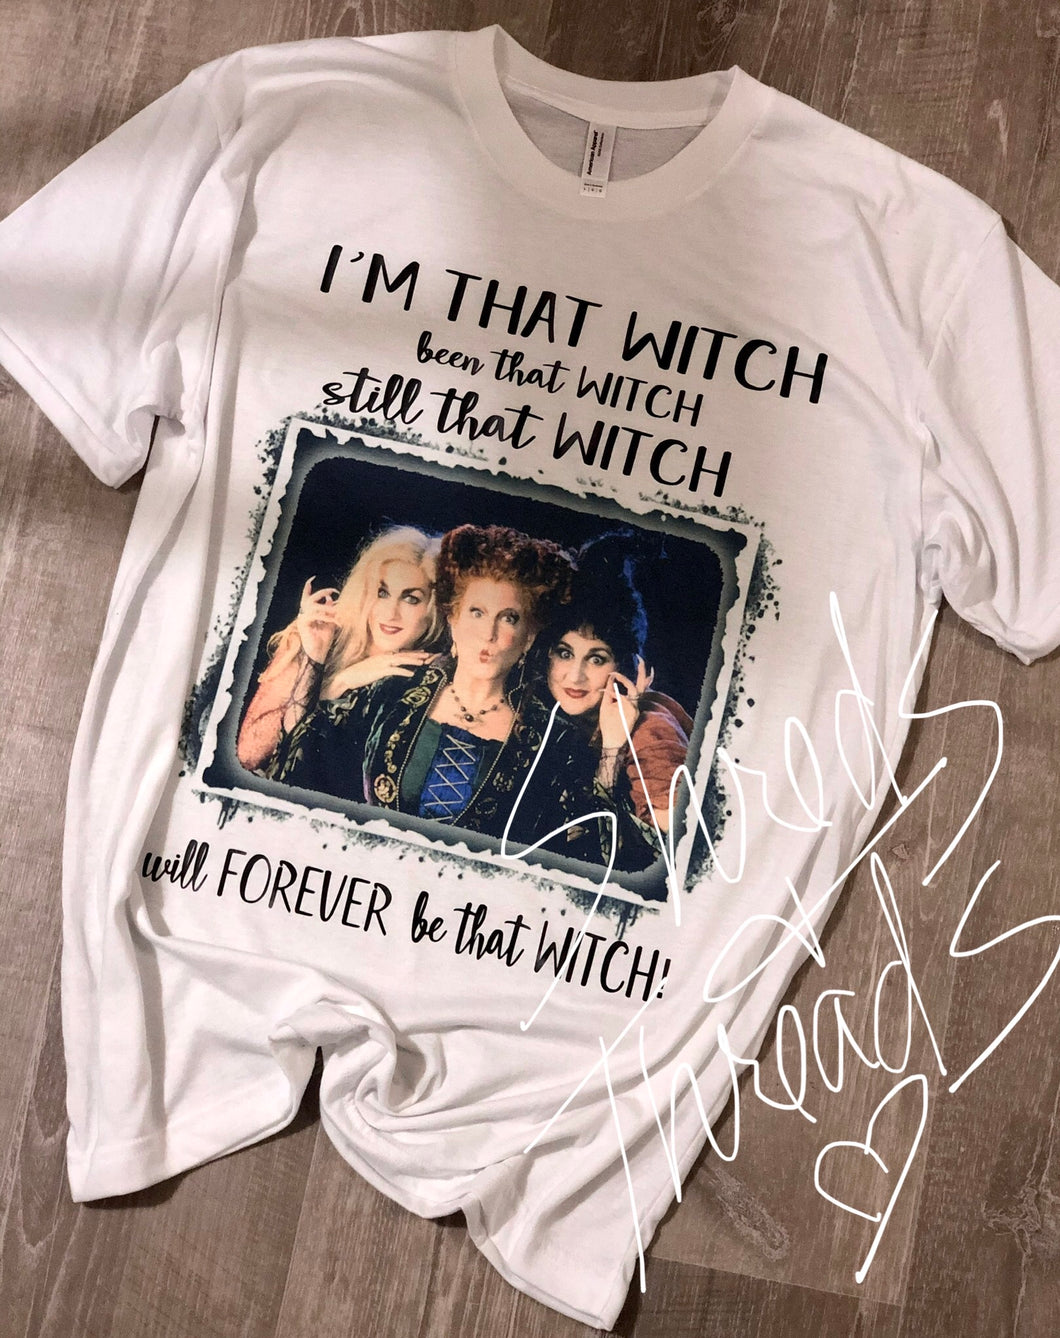 That Witch T-shirt